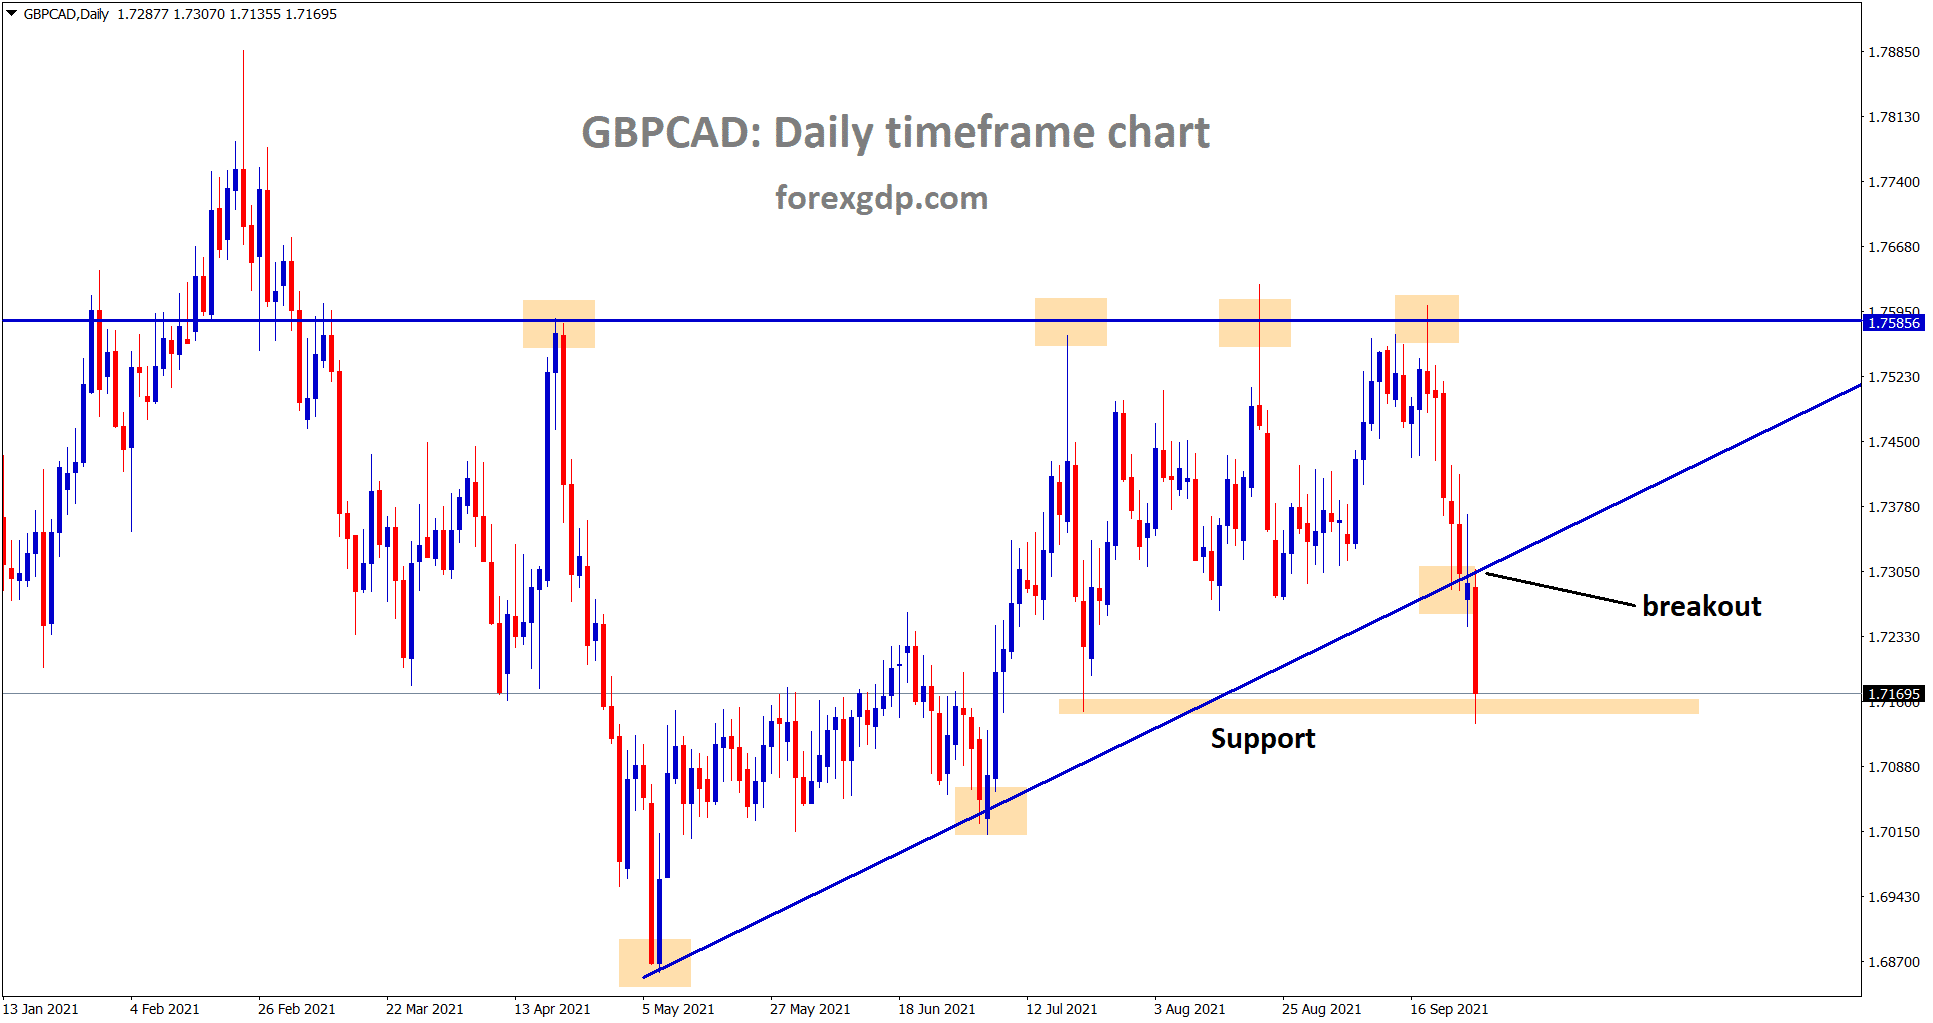 GBPCAD has broken the ascending triangle low and reached the horizontal support area